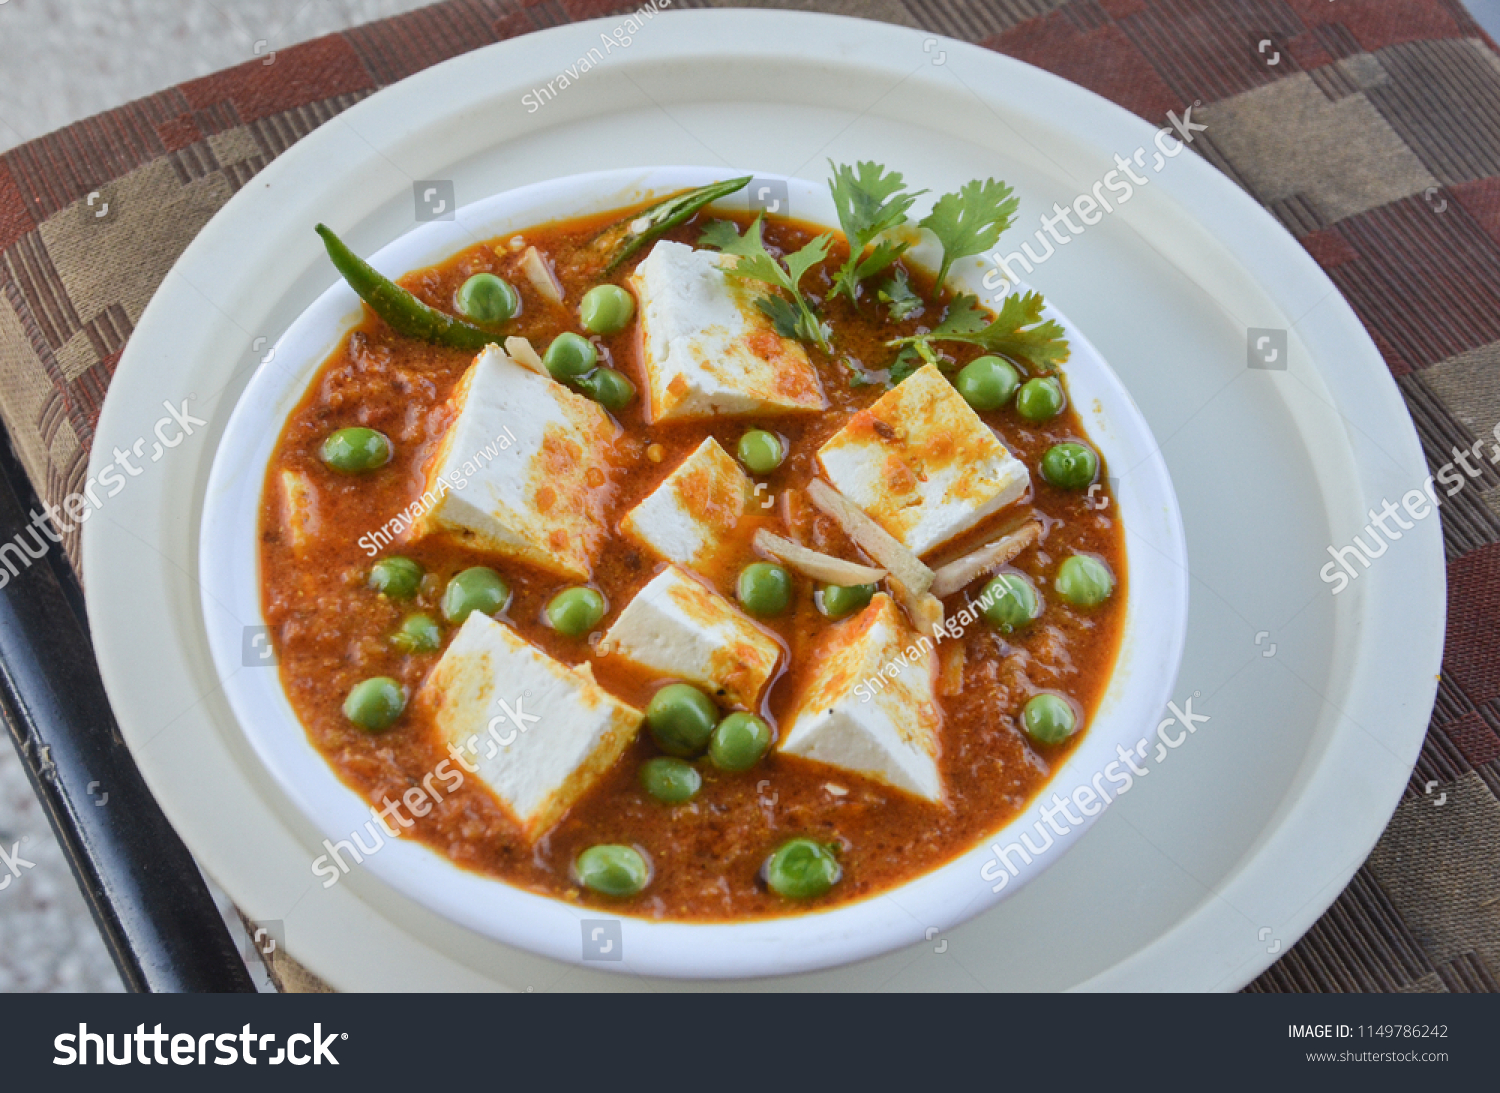 cheese, vegetable dish,cheese and peas #1149786242